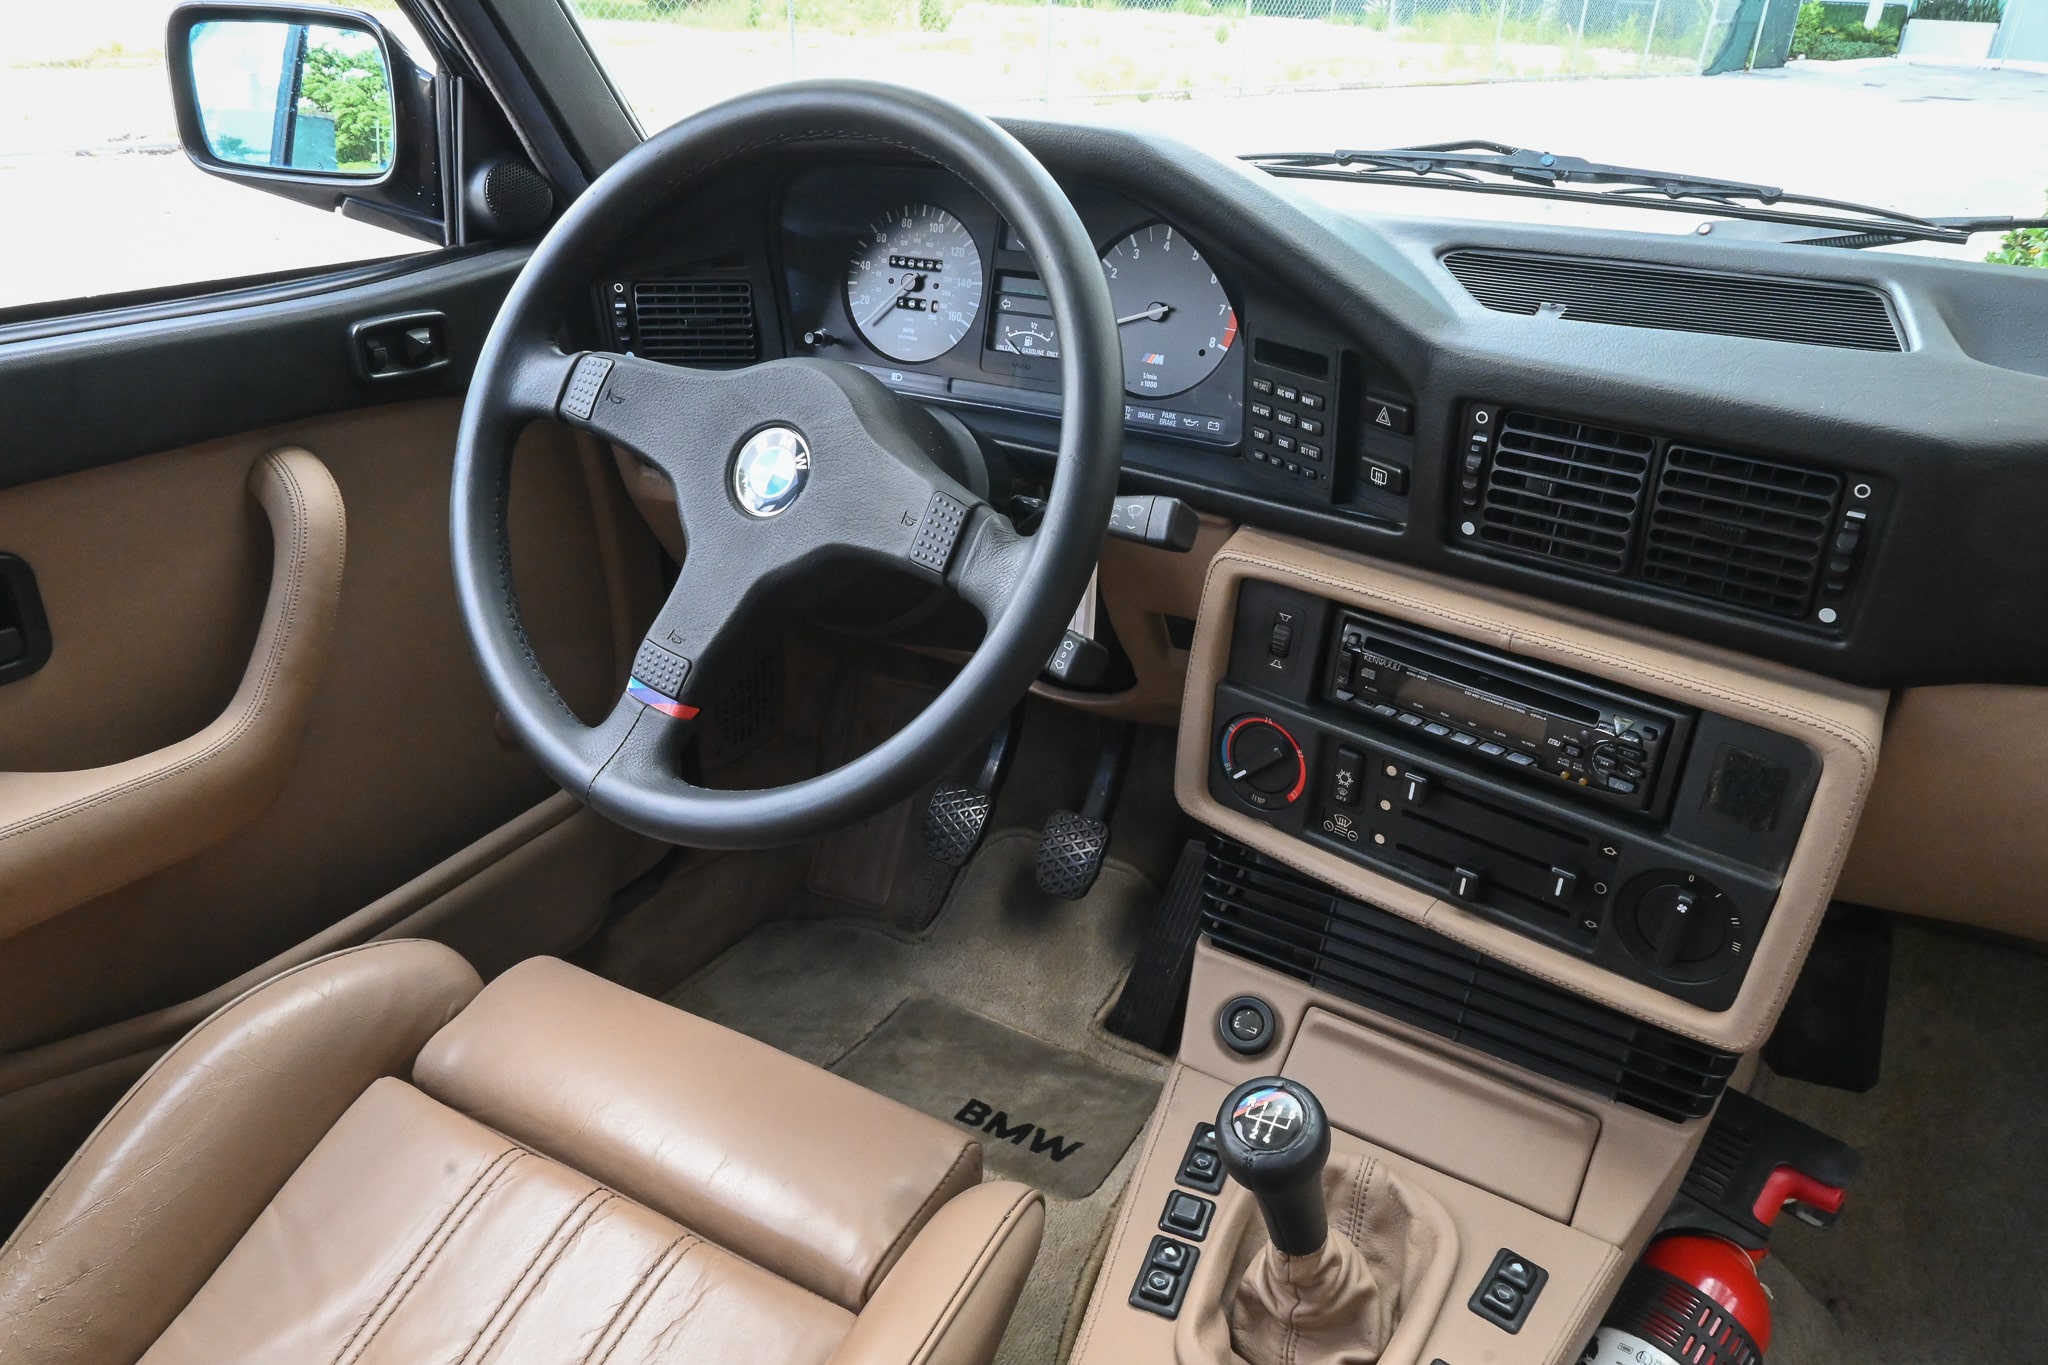 1988 E28 BMW M5 California Car | 2 Owner | 1 of 1239 | Original Bill of Sale | Hand Built Documented Service History | Recently Serviced